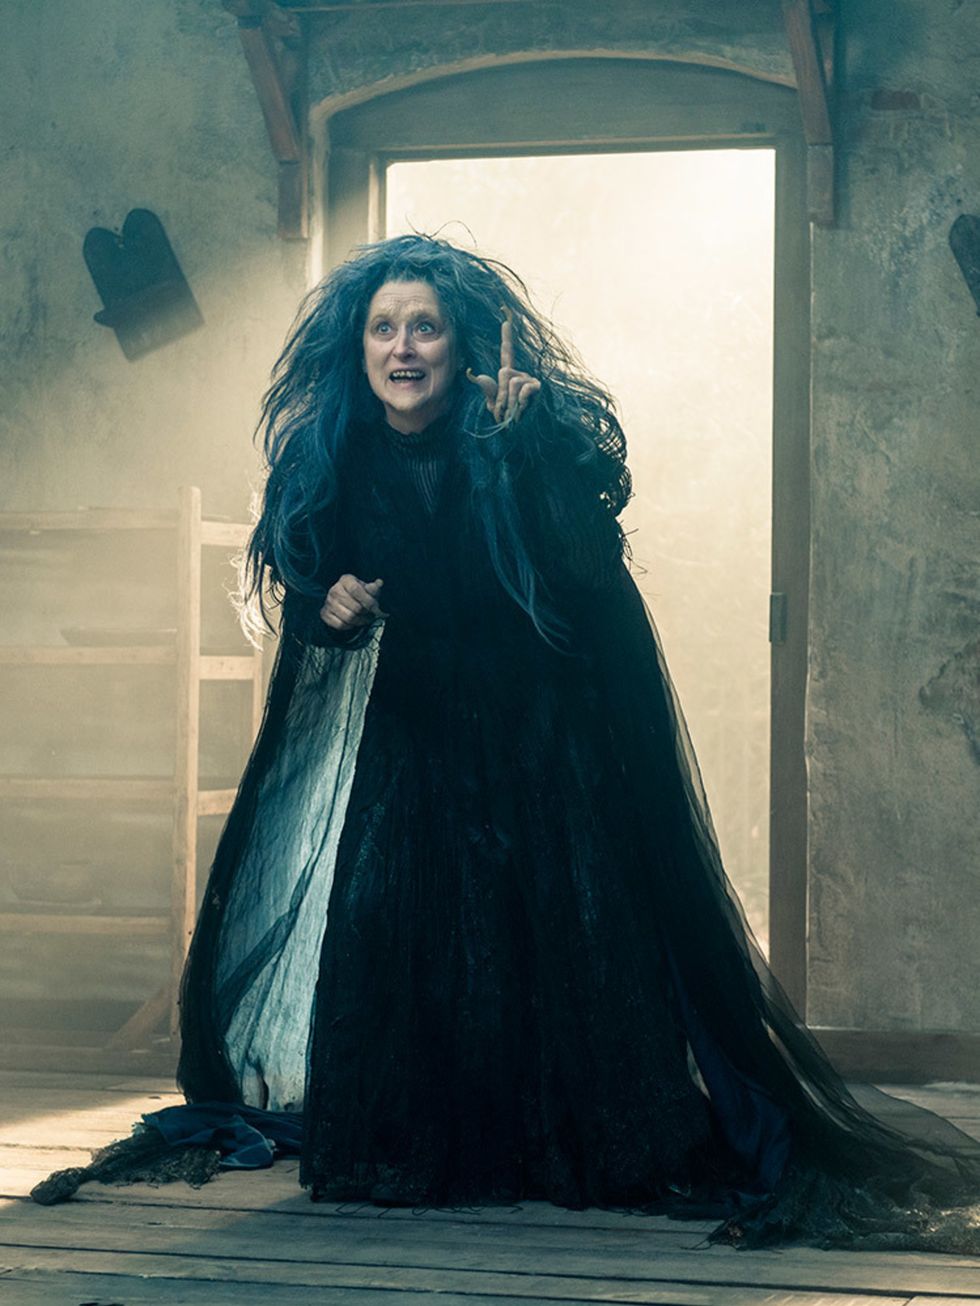 <p><strong>FILM: Into The Woods</strong></p>

<p>Already shaping up to be one of the hottest films of the year, Into The Woods puts a modern twist on the happily-ever-afters of classic fairy-tale favourites such as Rapunzel and Cinderella.</p>

<p>Starrin